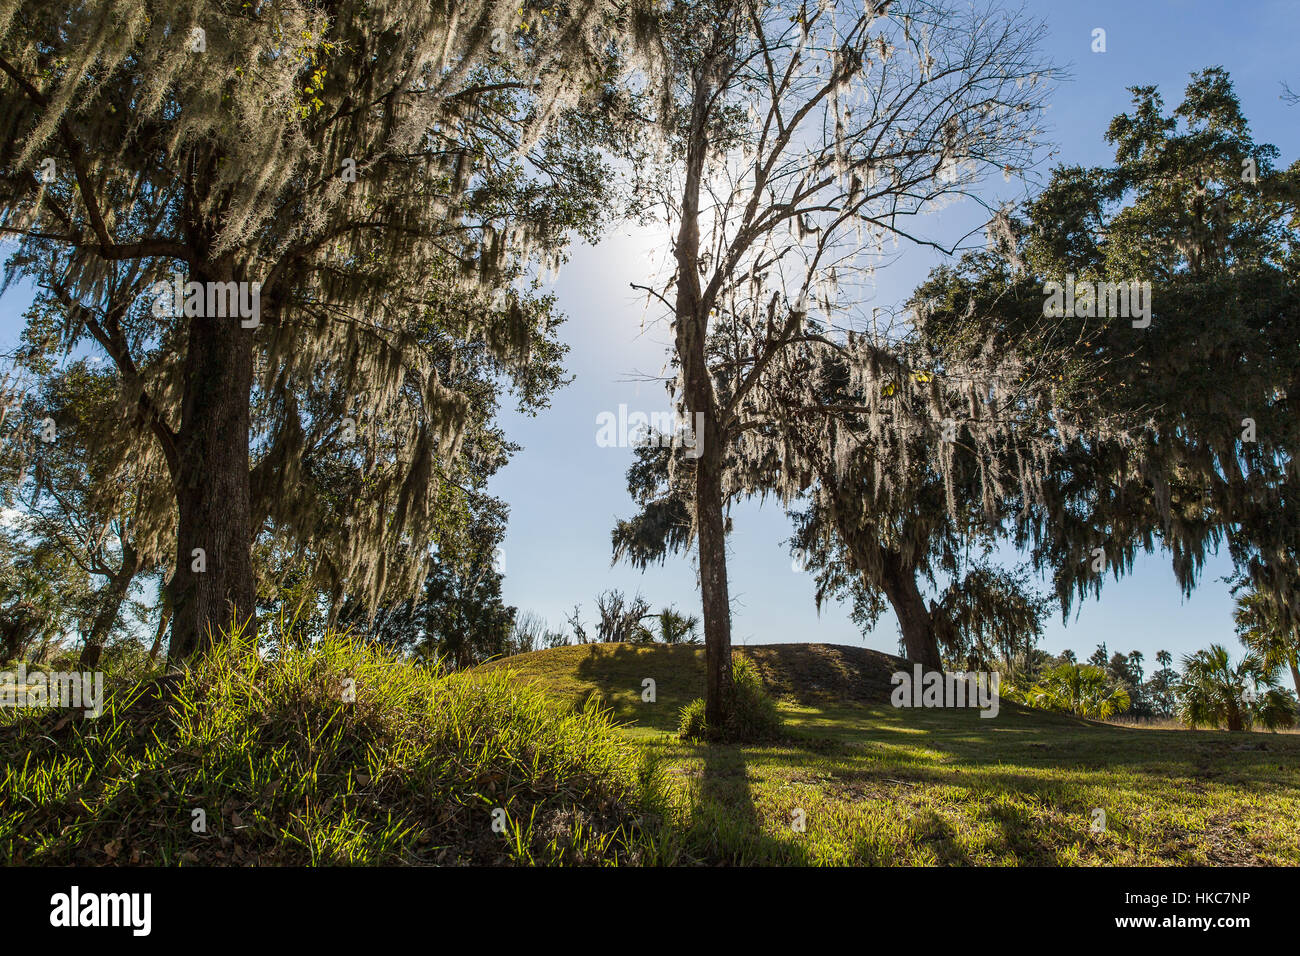 Native American earthen mound, miden mound J, at the Crystal River Archaeological State Park in Citrus County, Florida. Stock Photo